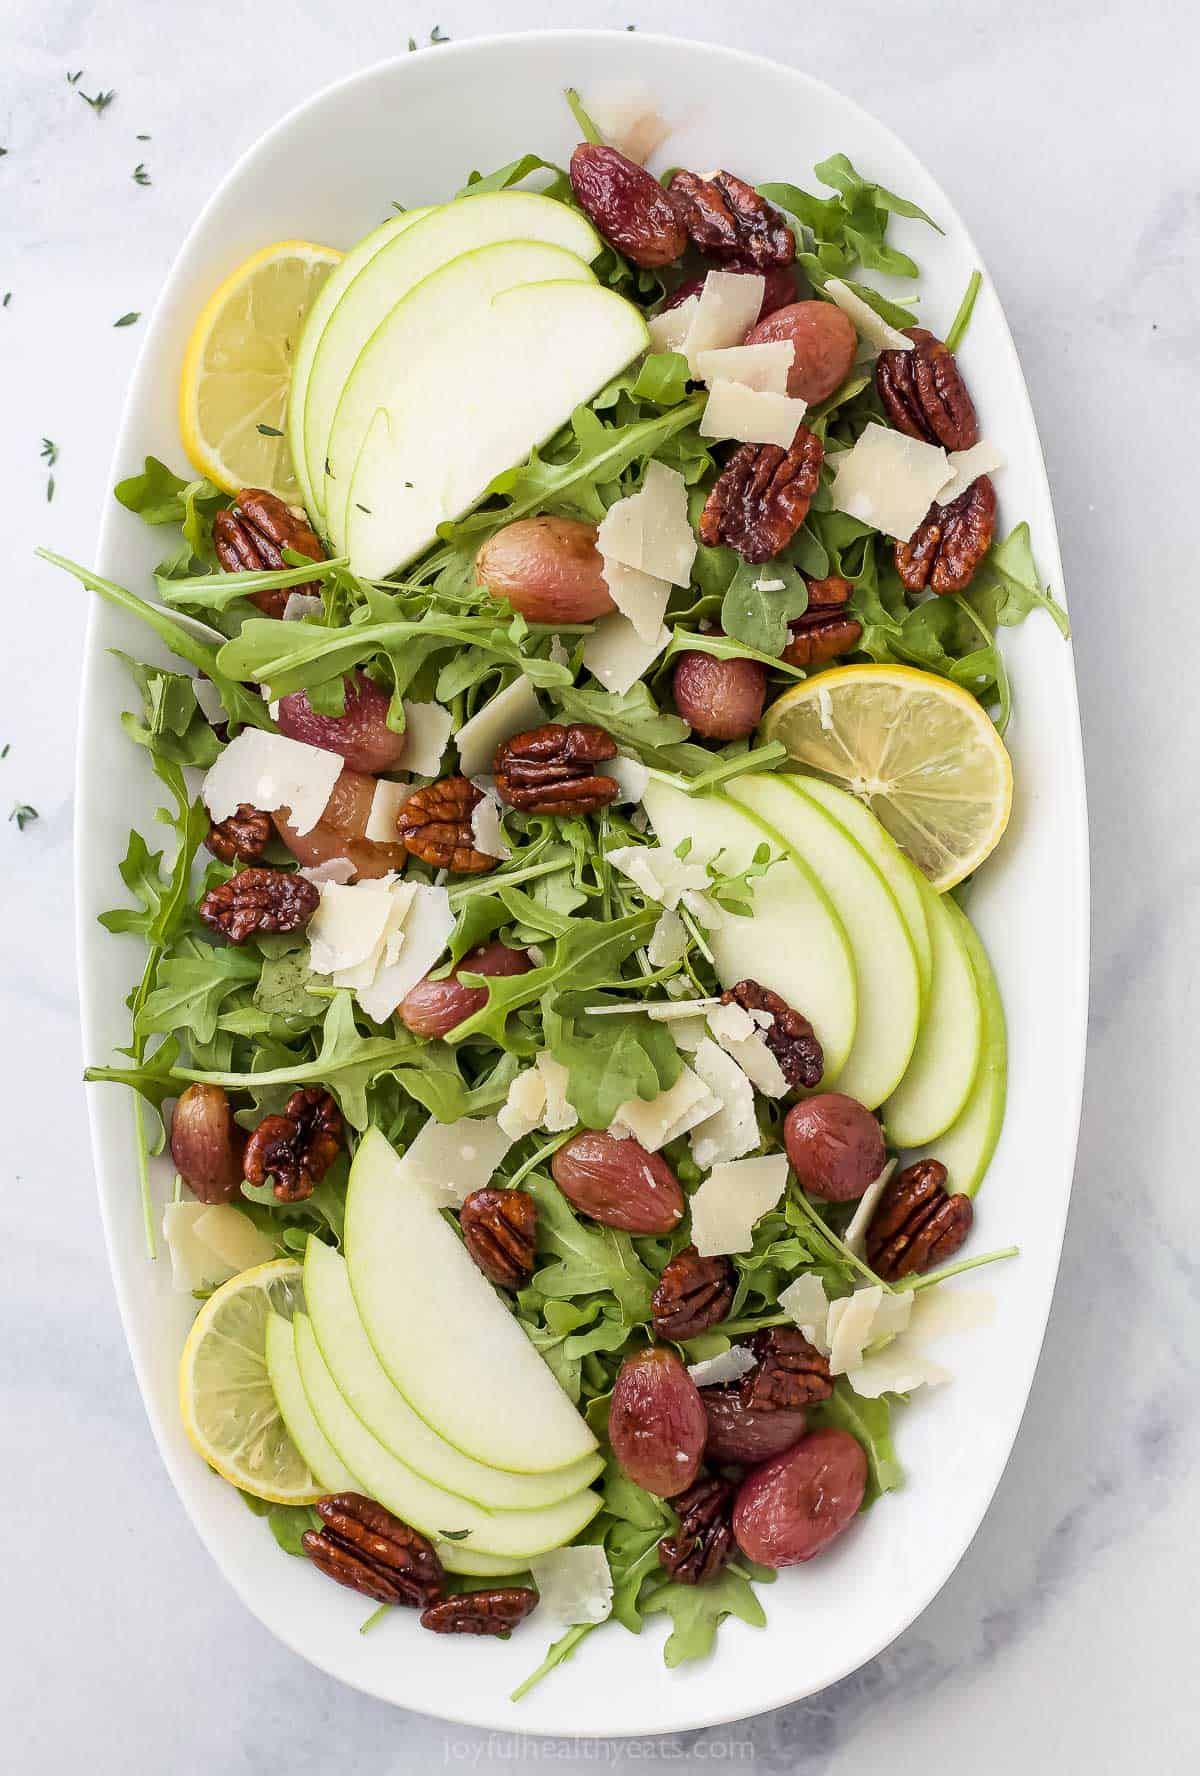 A large serving platter containing a fall salad with candied pecans, apple slices and roasted grapes